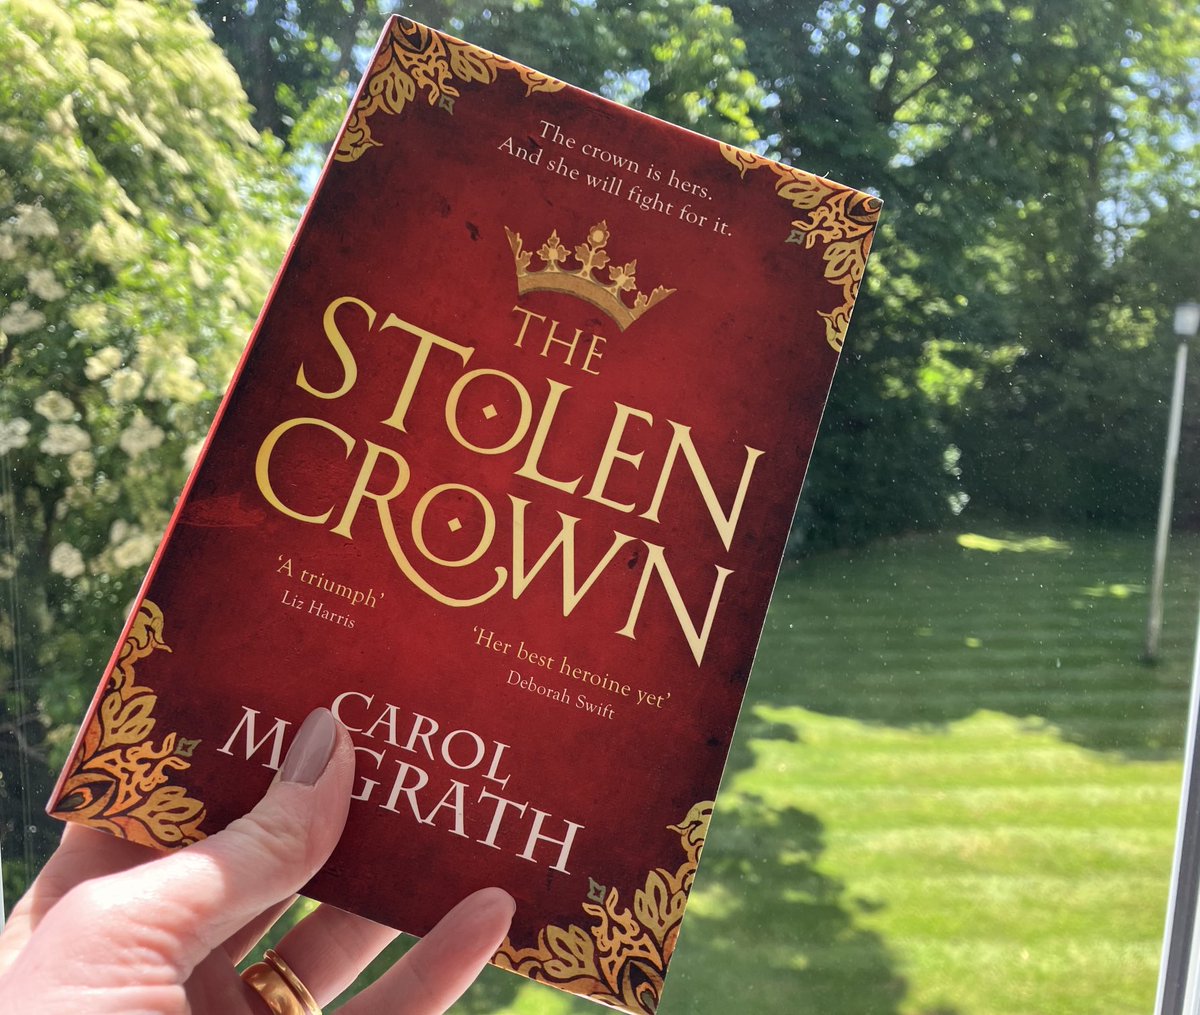 Very much looking forward to reading #TheStolenCrown by ⁦@carolmcgrath⁩. Thanks to ⁦@headlinepg⁩ for the #bookpost #readingrecommendation